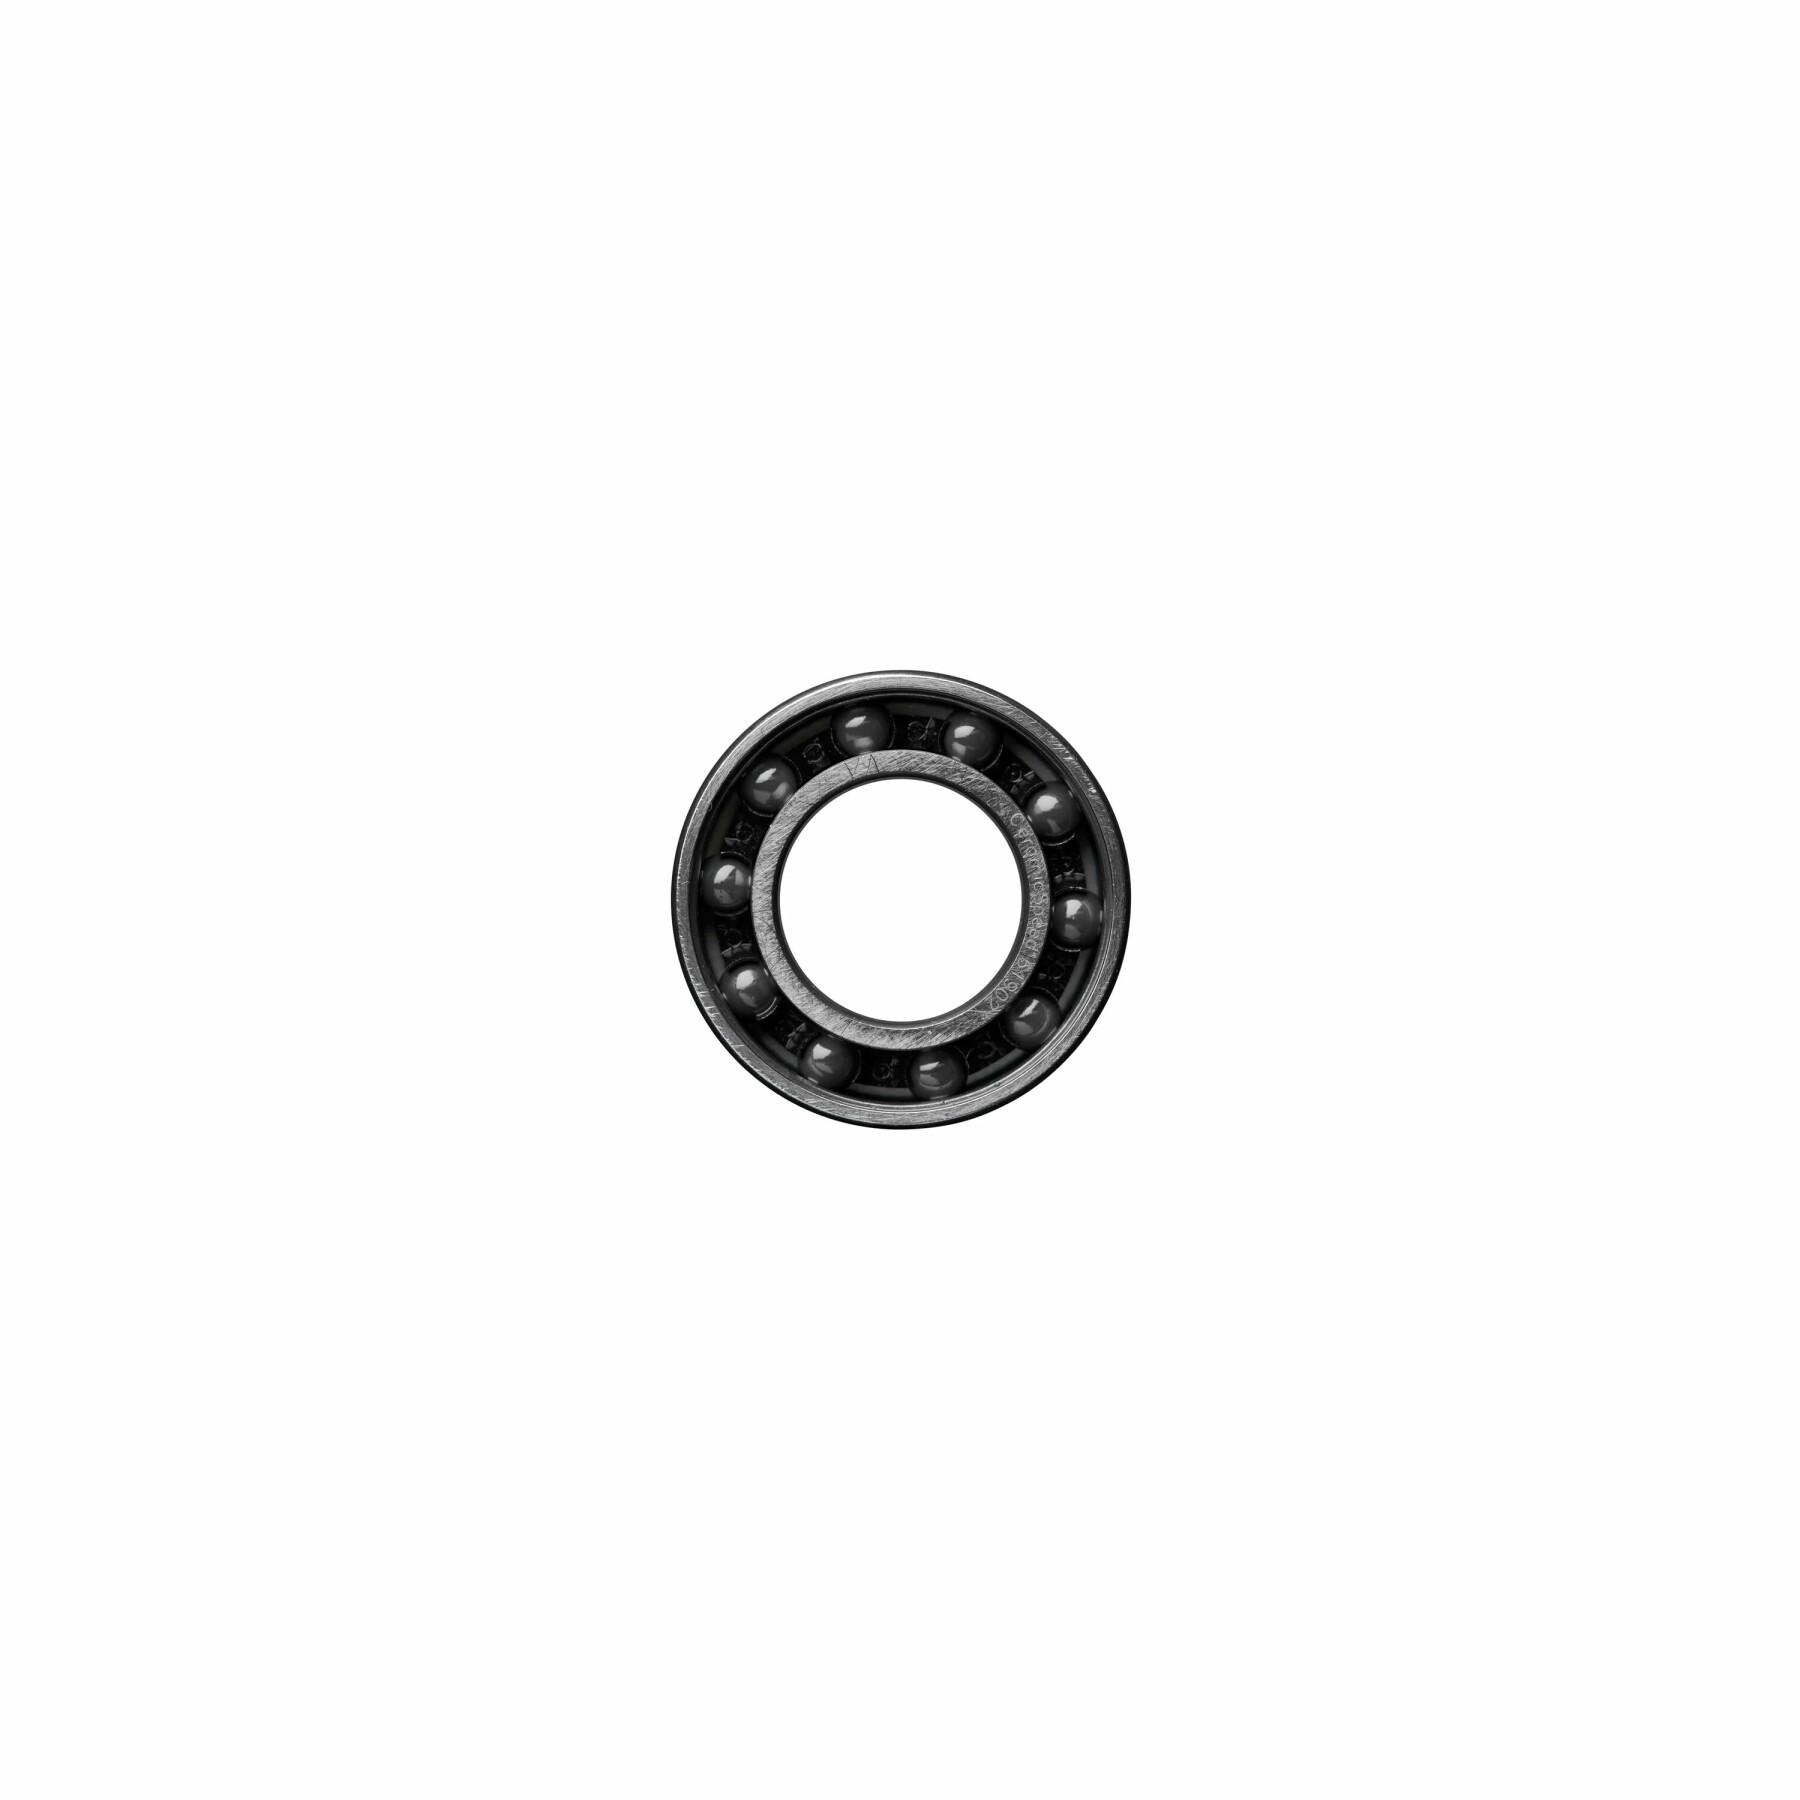 Details about   CeramicSpeed 15x28x7mm 61902 Non-coated Bearing 1pc #101266 